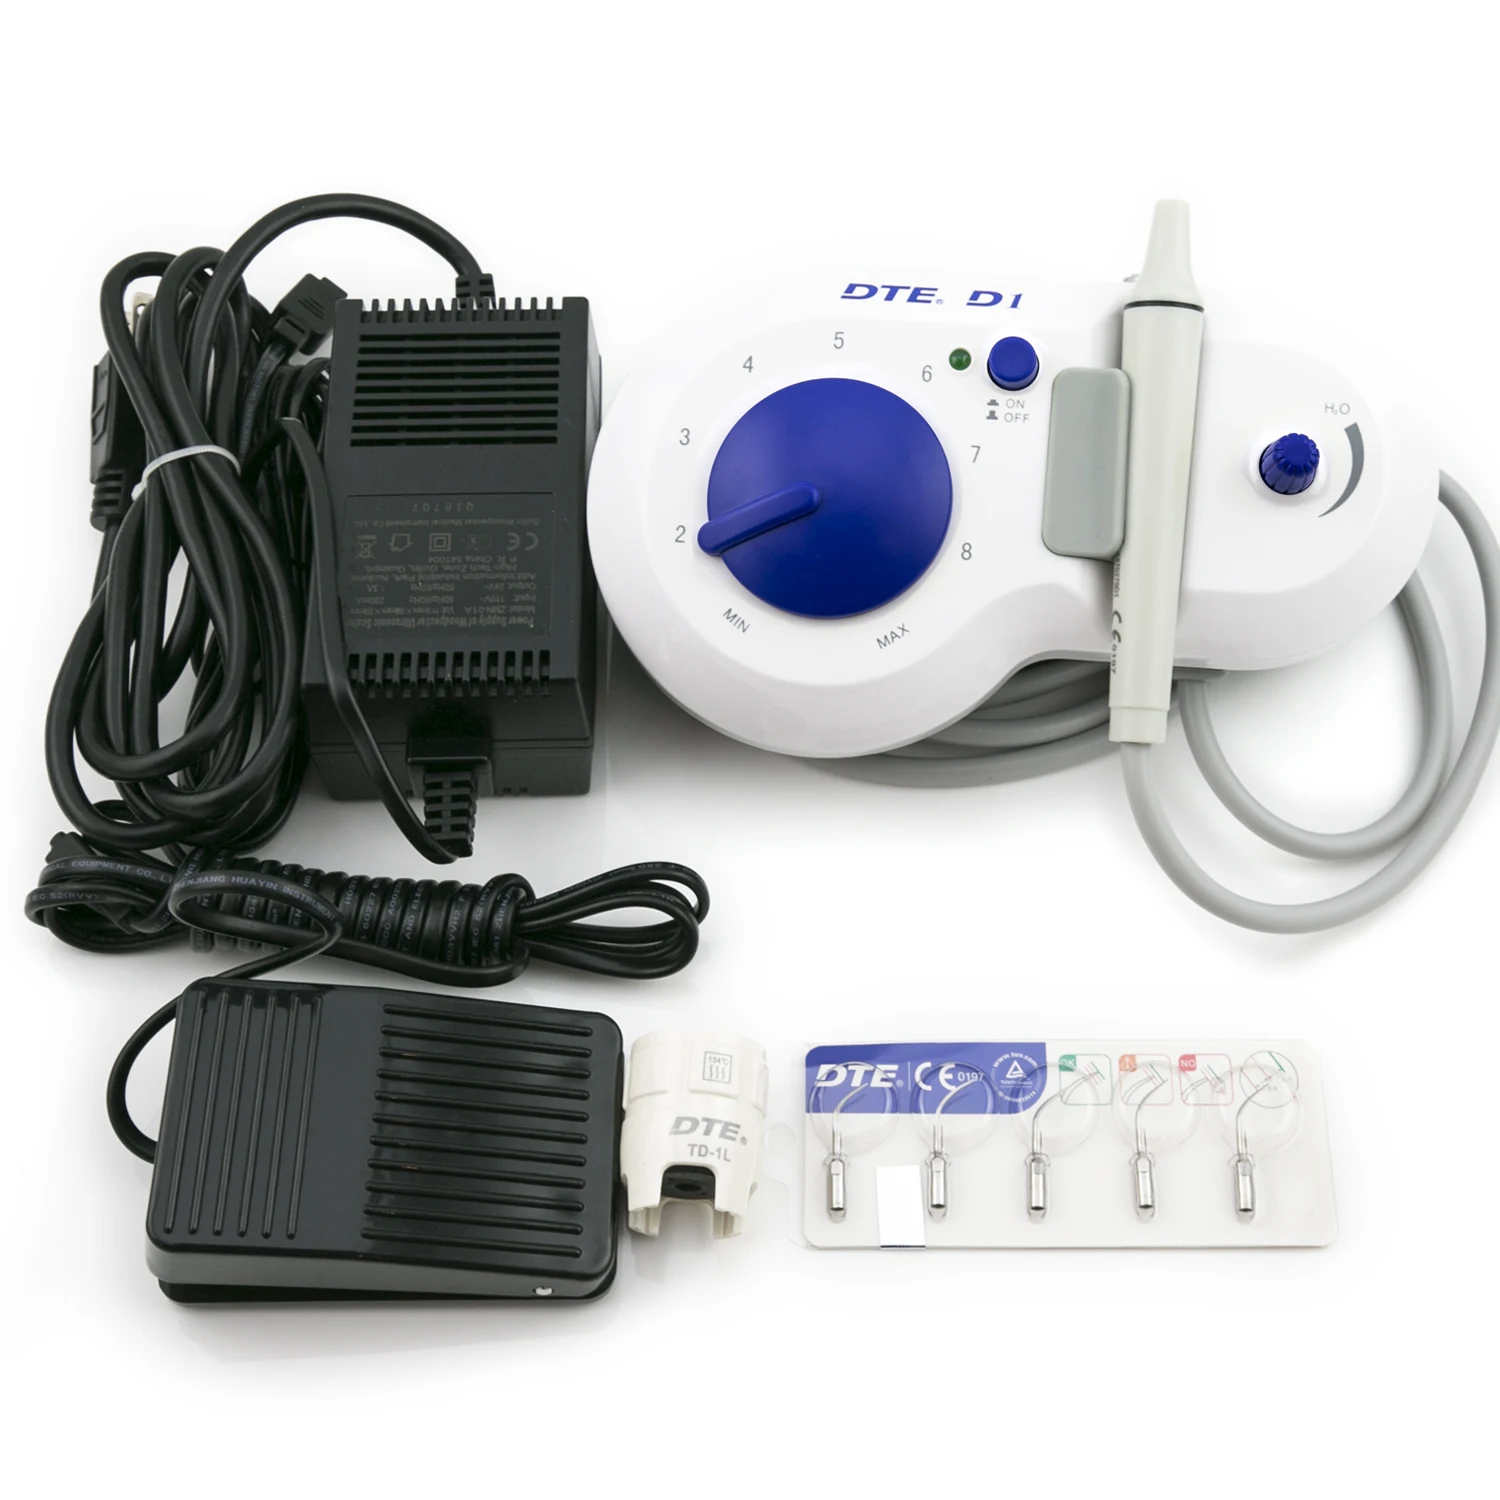 Cheap price Real China Woodpecker DTE D1 Dental Ultrasonic Scaler used for Dental Clinic Dentist Blue Color